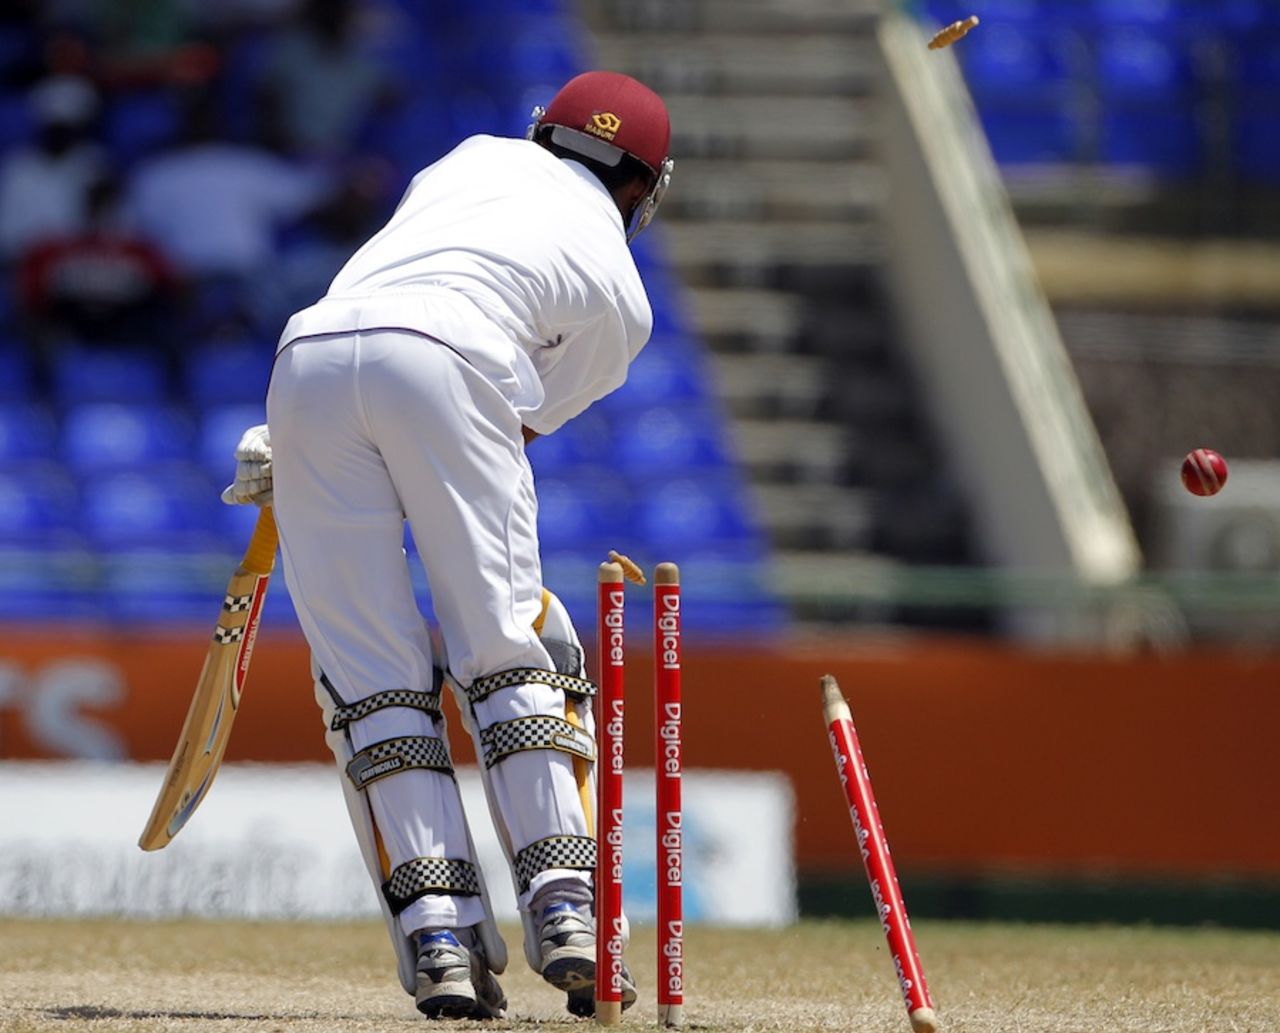 Kraigg Brathwaite was bowled for a duck, West Indies v Pakistan, 2nd Test, St Kitts, 4th day, May 23, 2011